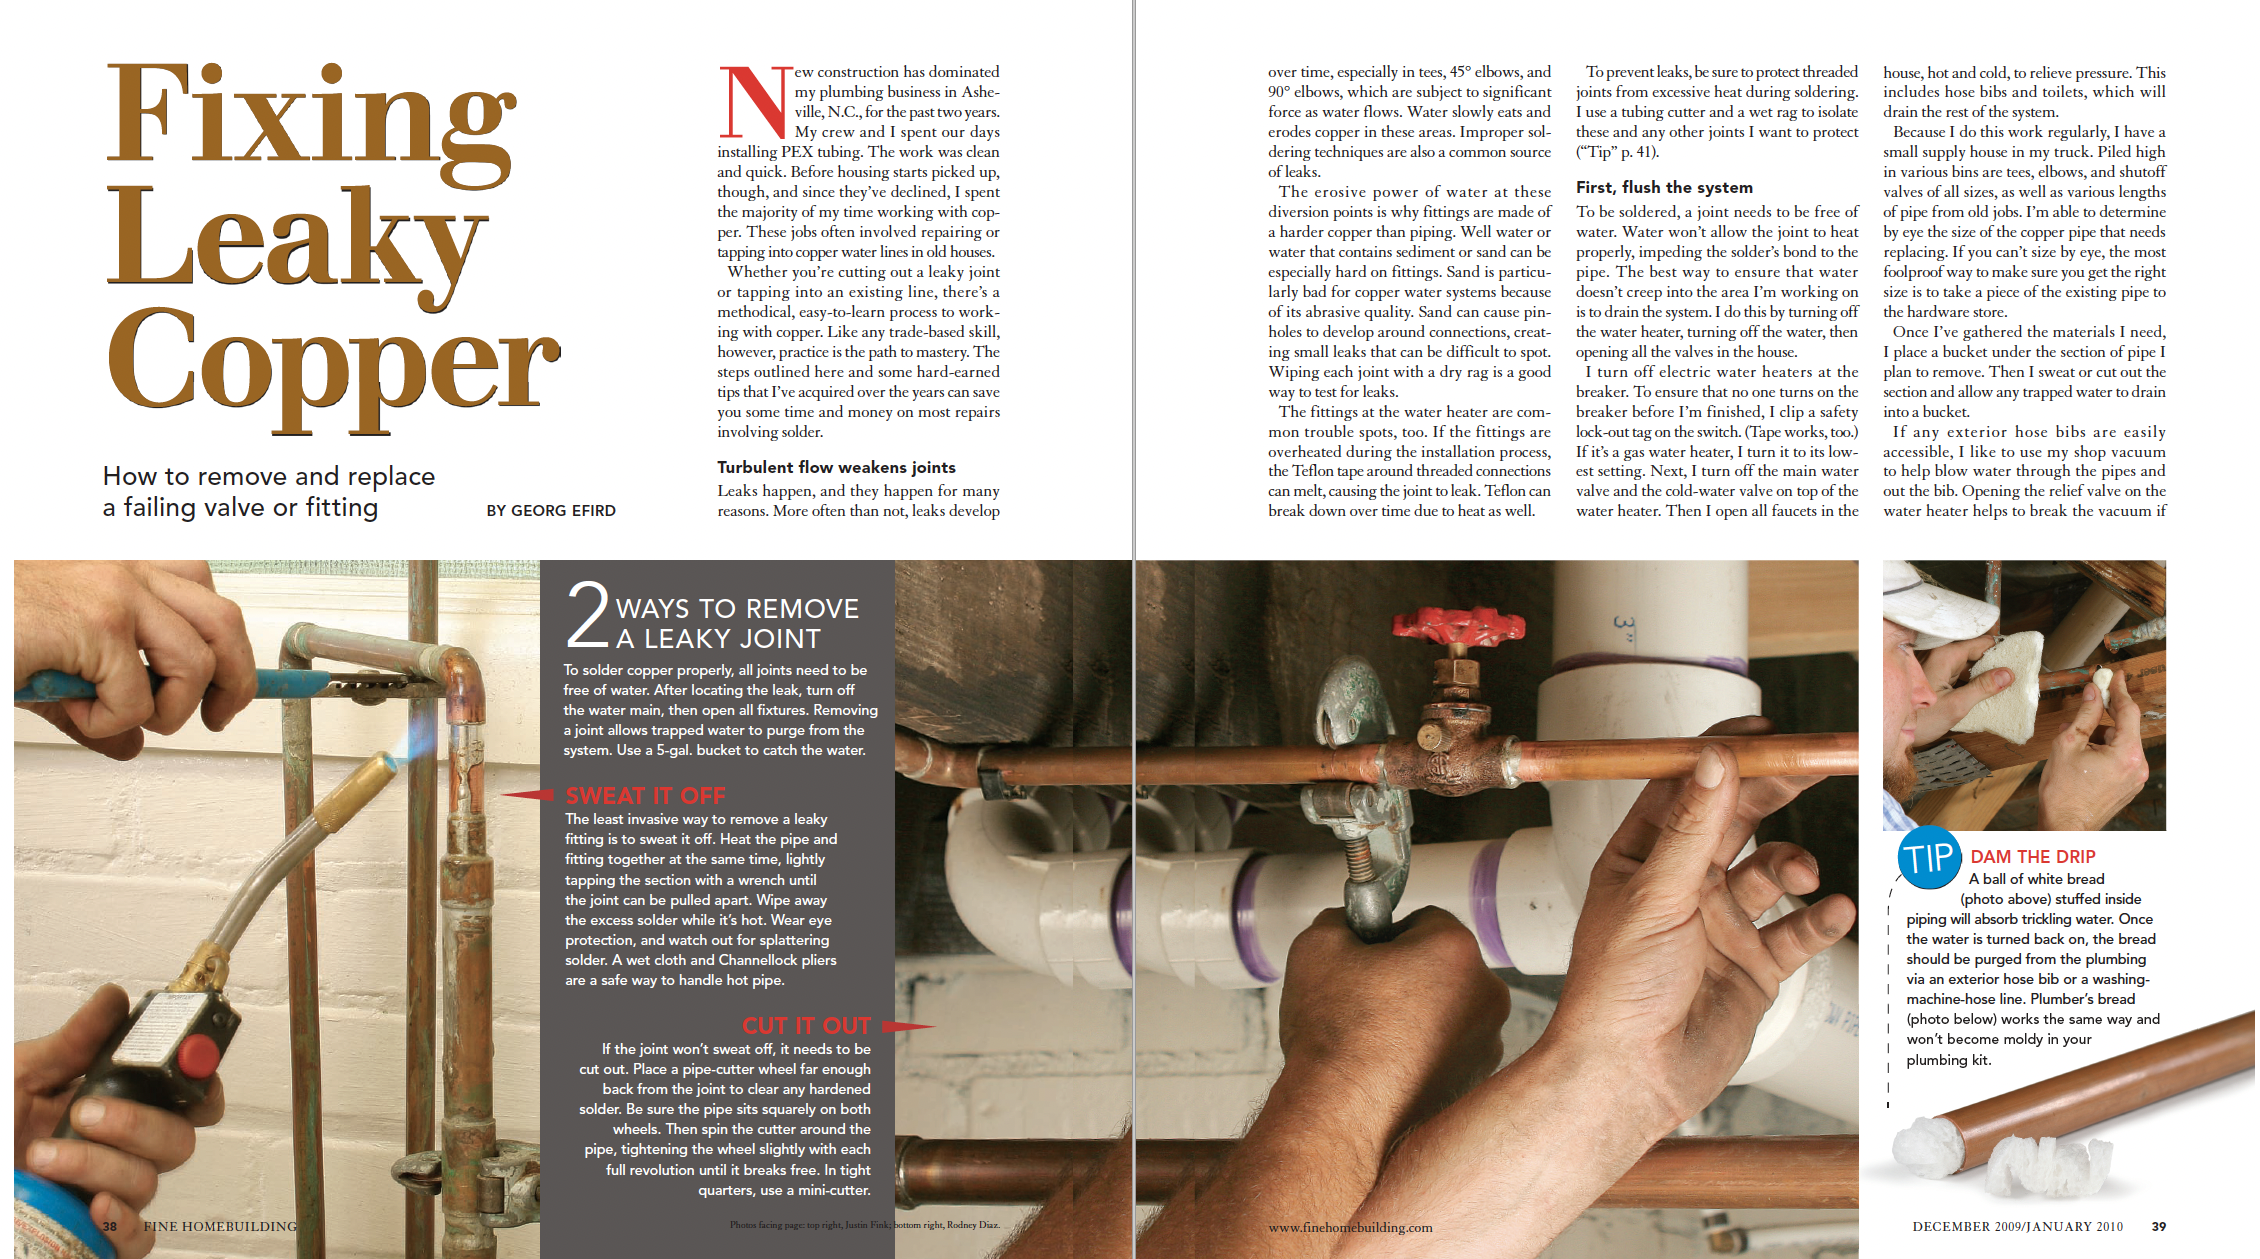 How To Repair A Copper Pipe Joint Leak by Easy Rooter Plumbing - Issuu